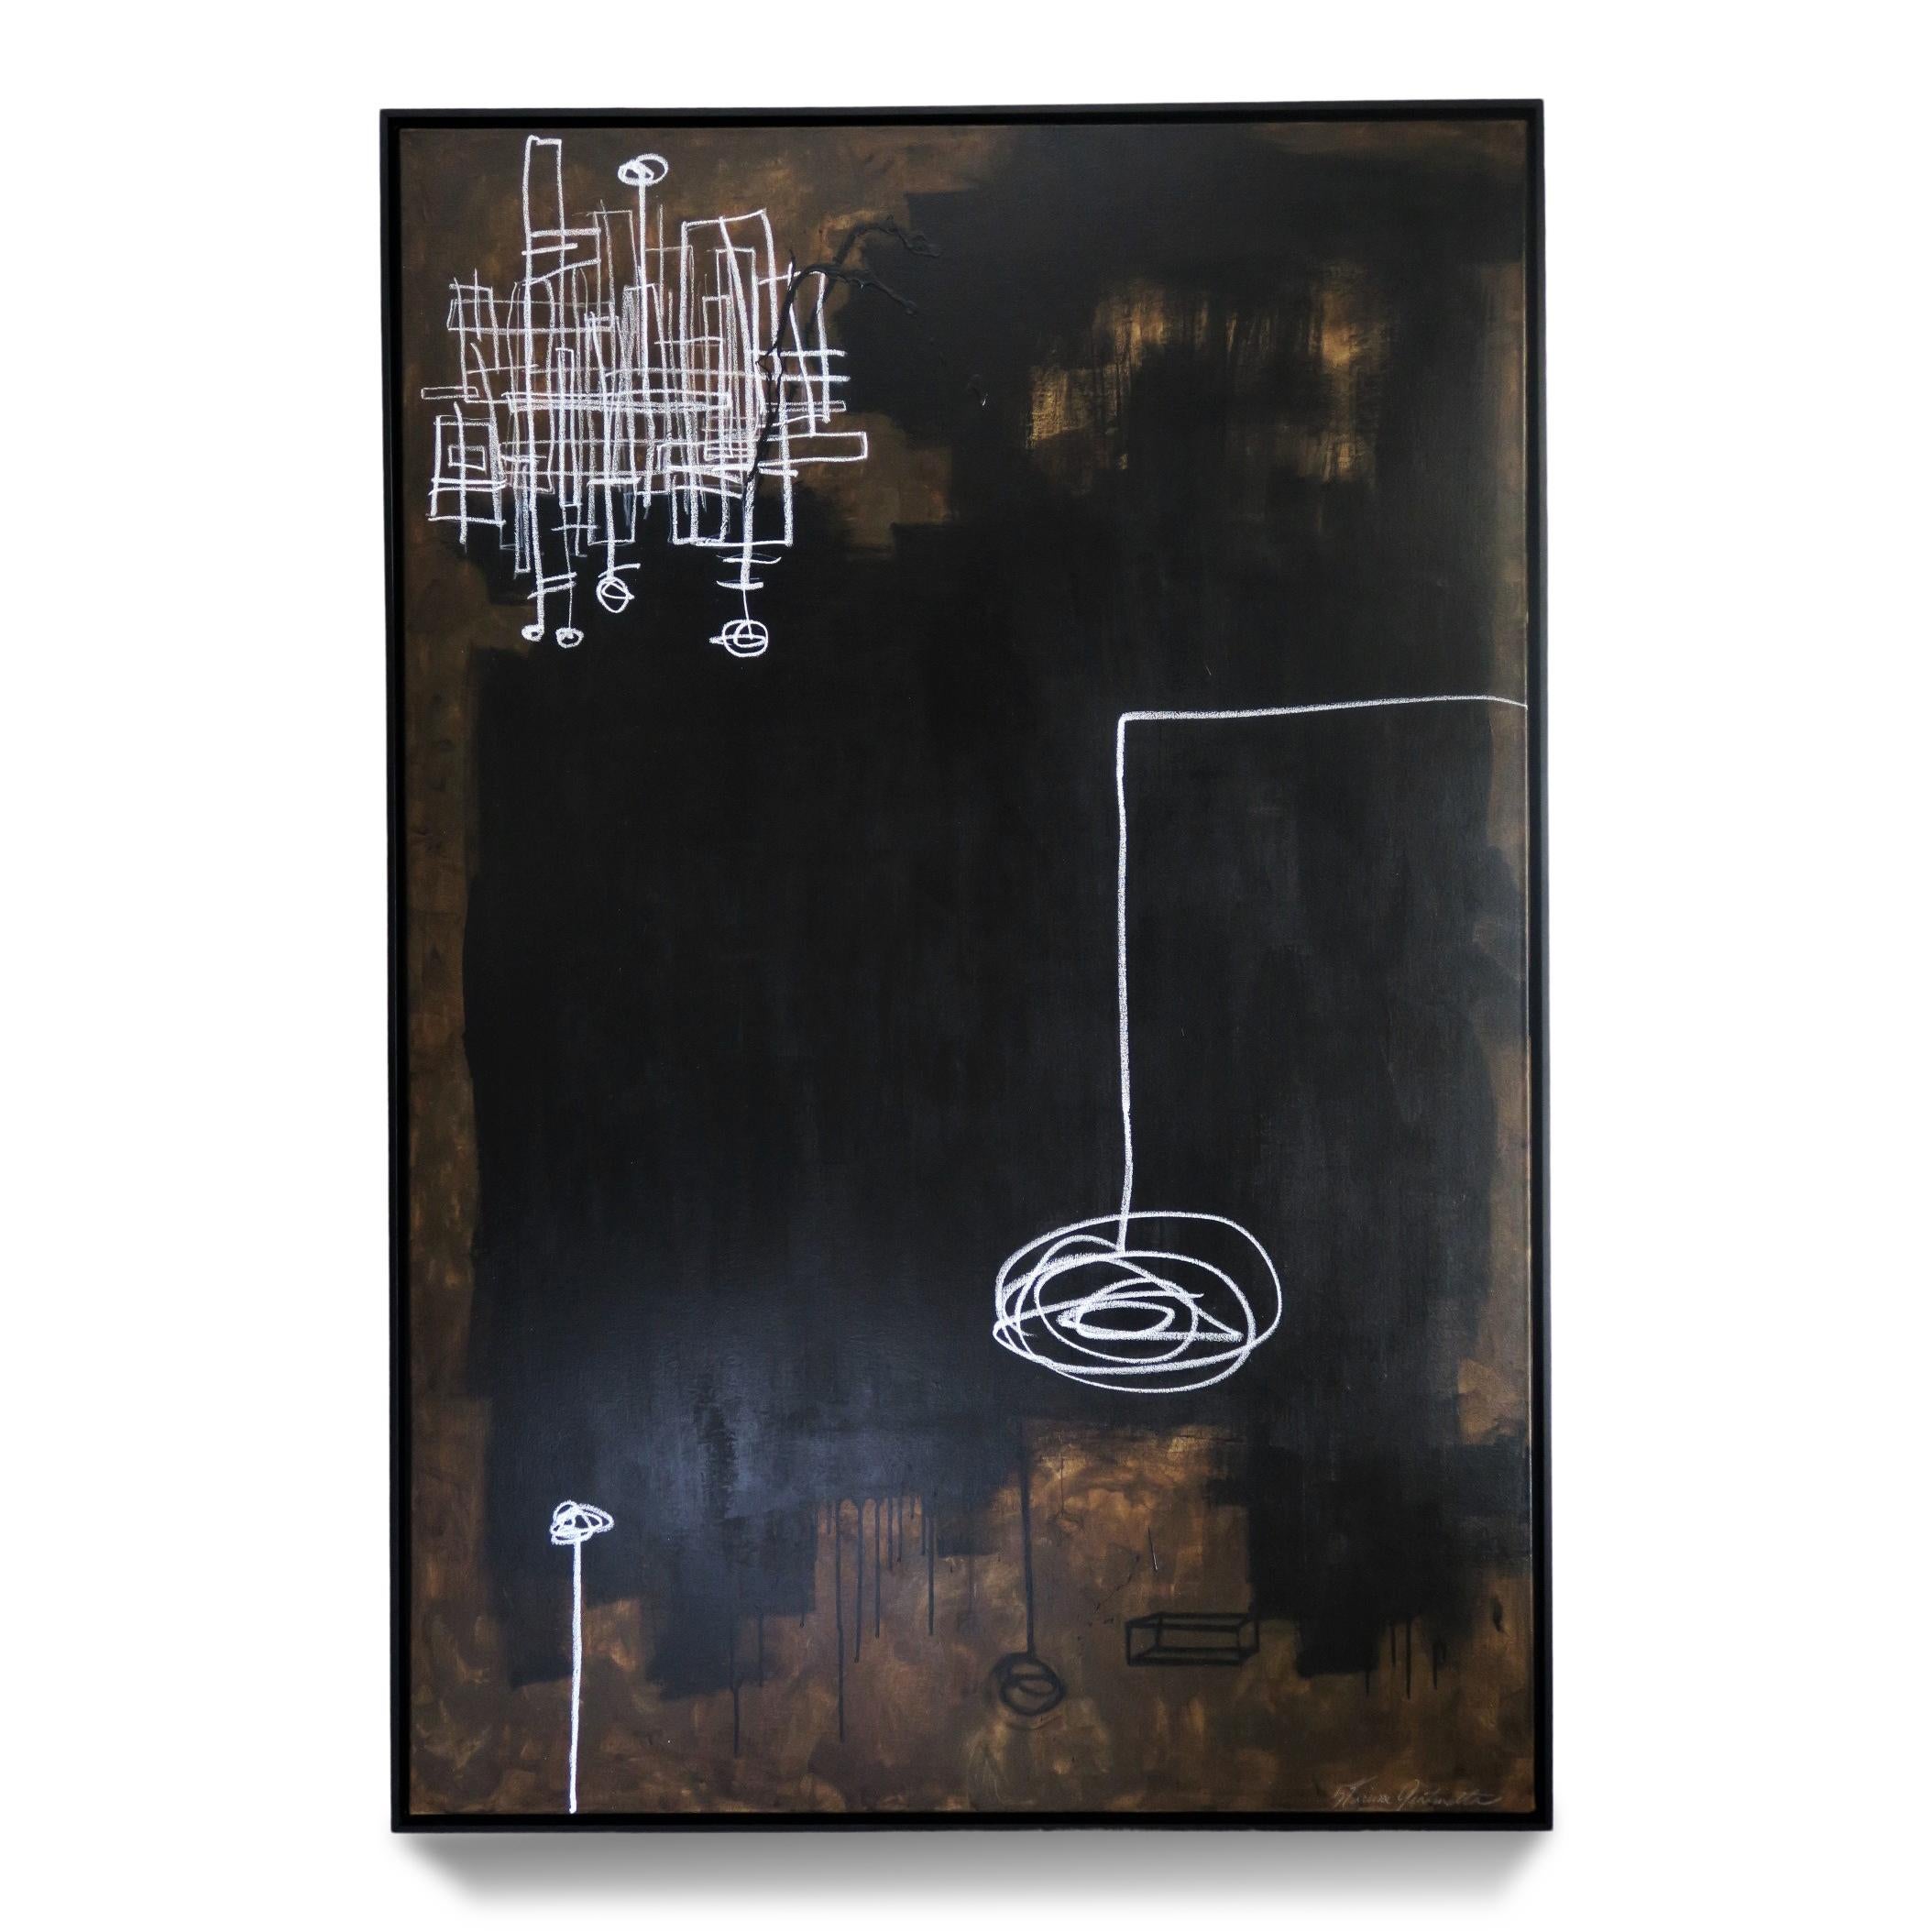 "Intrepid" 2020, 72" x 48". Large abstract painting consisting of bold black and burnt umber (brown) acrylic paint with white oil pastel on canvas by Argentine-born artist Karina Gentinetta (featured in Elle Decor, the New York Times, Traditional